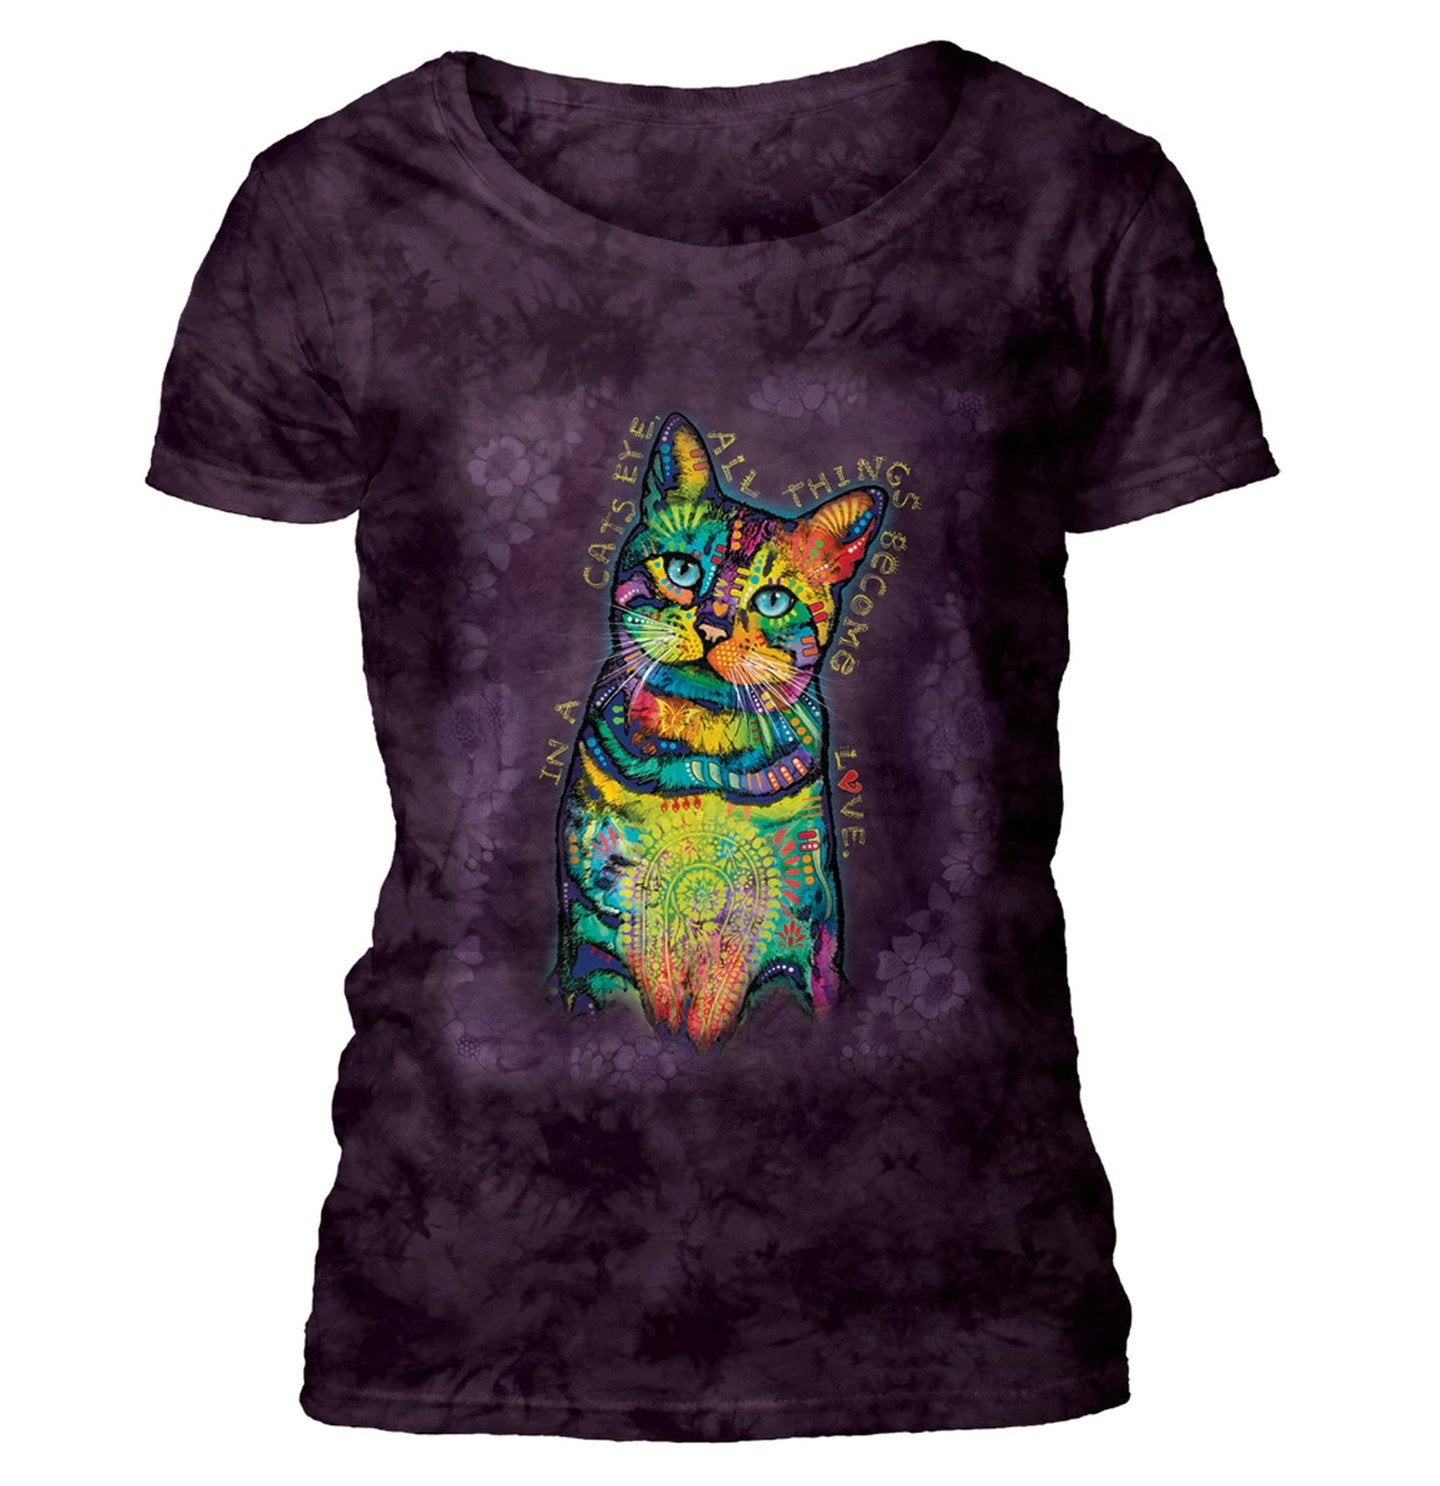 The Mountain - Cats Eyes - Women's Scoop Neck T-Shirt